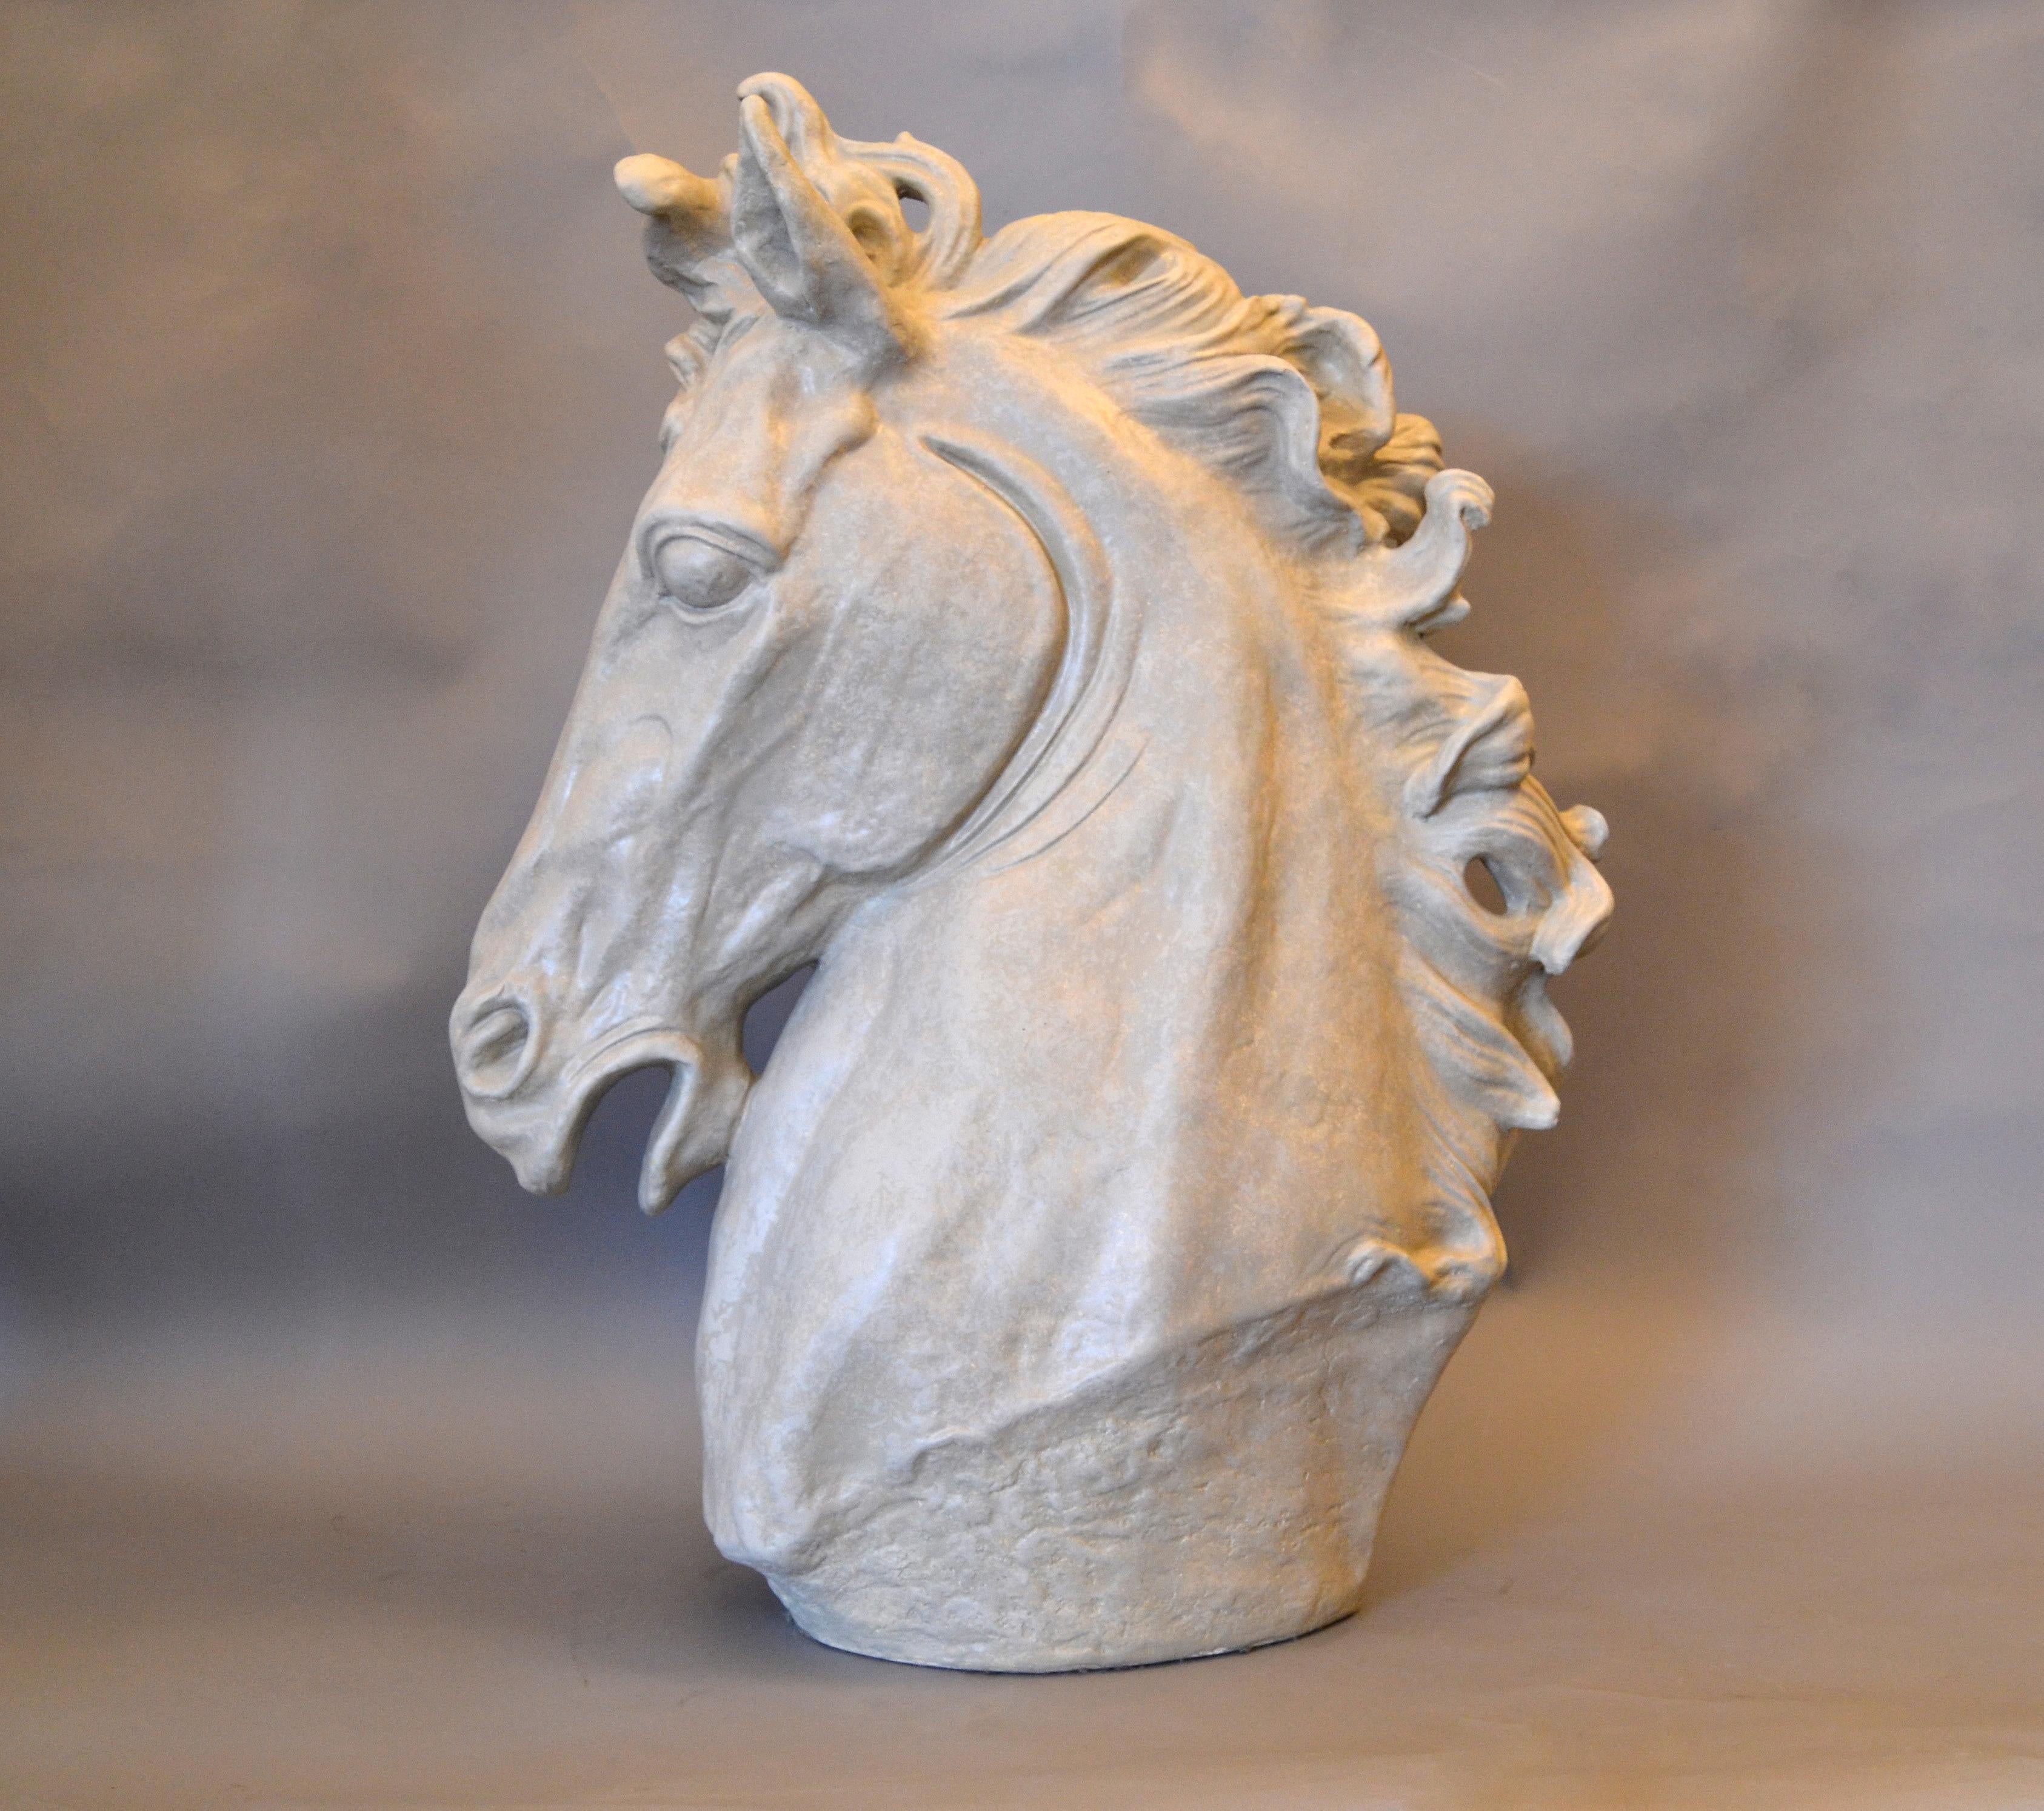 Mid-century modern big plaster horse head sculpture in gray.
Note the well-formed details.
The sculpture is simply lovely.